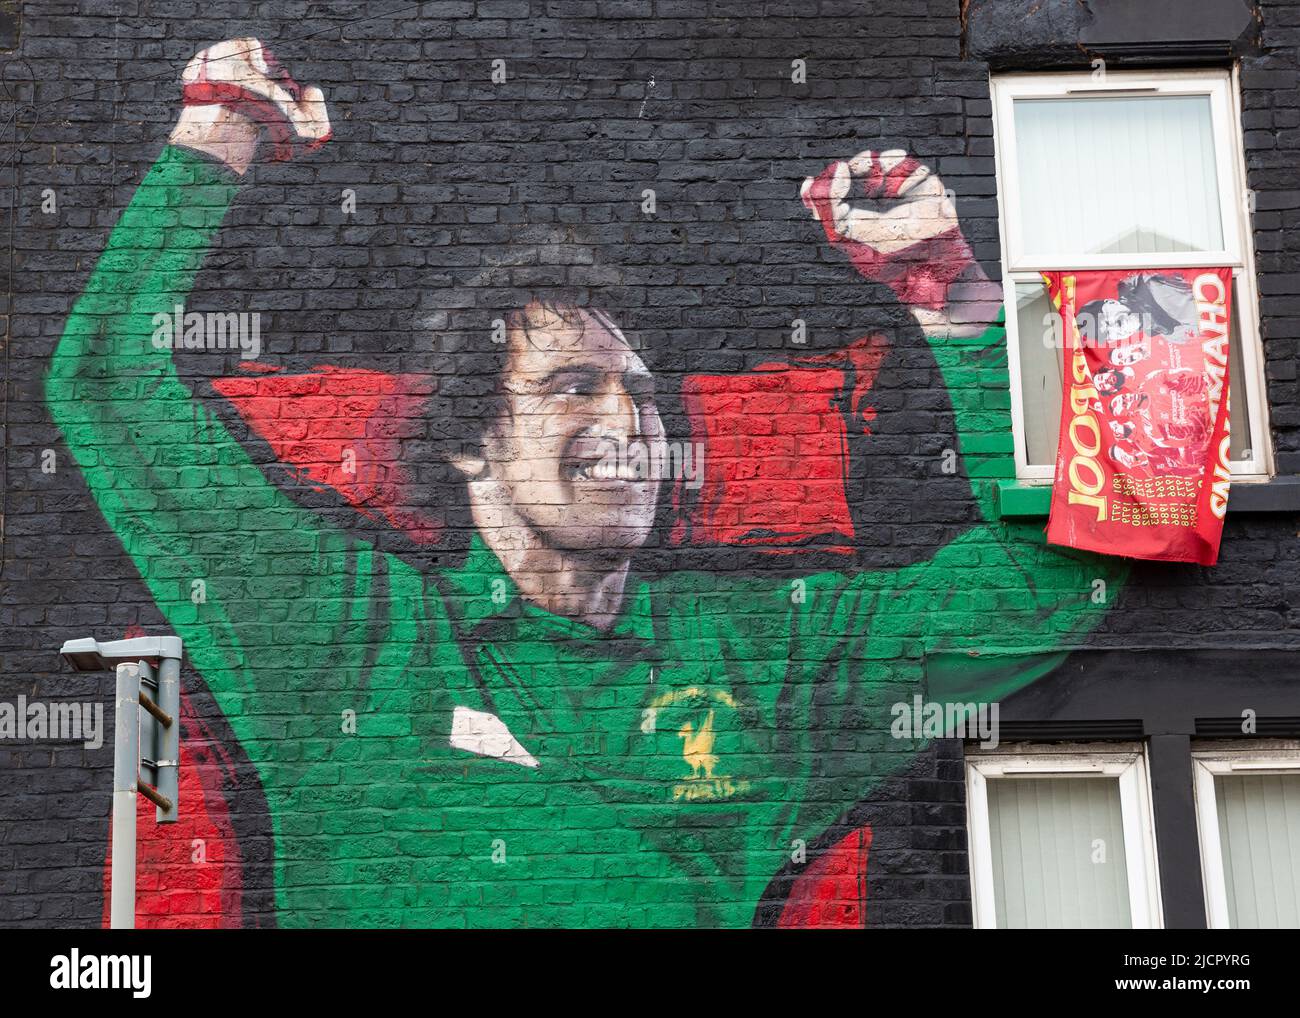 Ray Clemence mural, street art in tribute to Liverpool FC goalkeeper, Anfield, Liverpool, England, UK Stock Photo